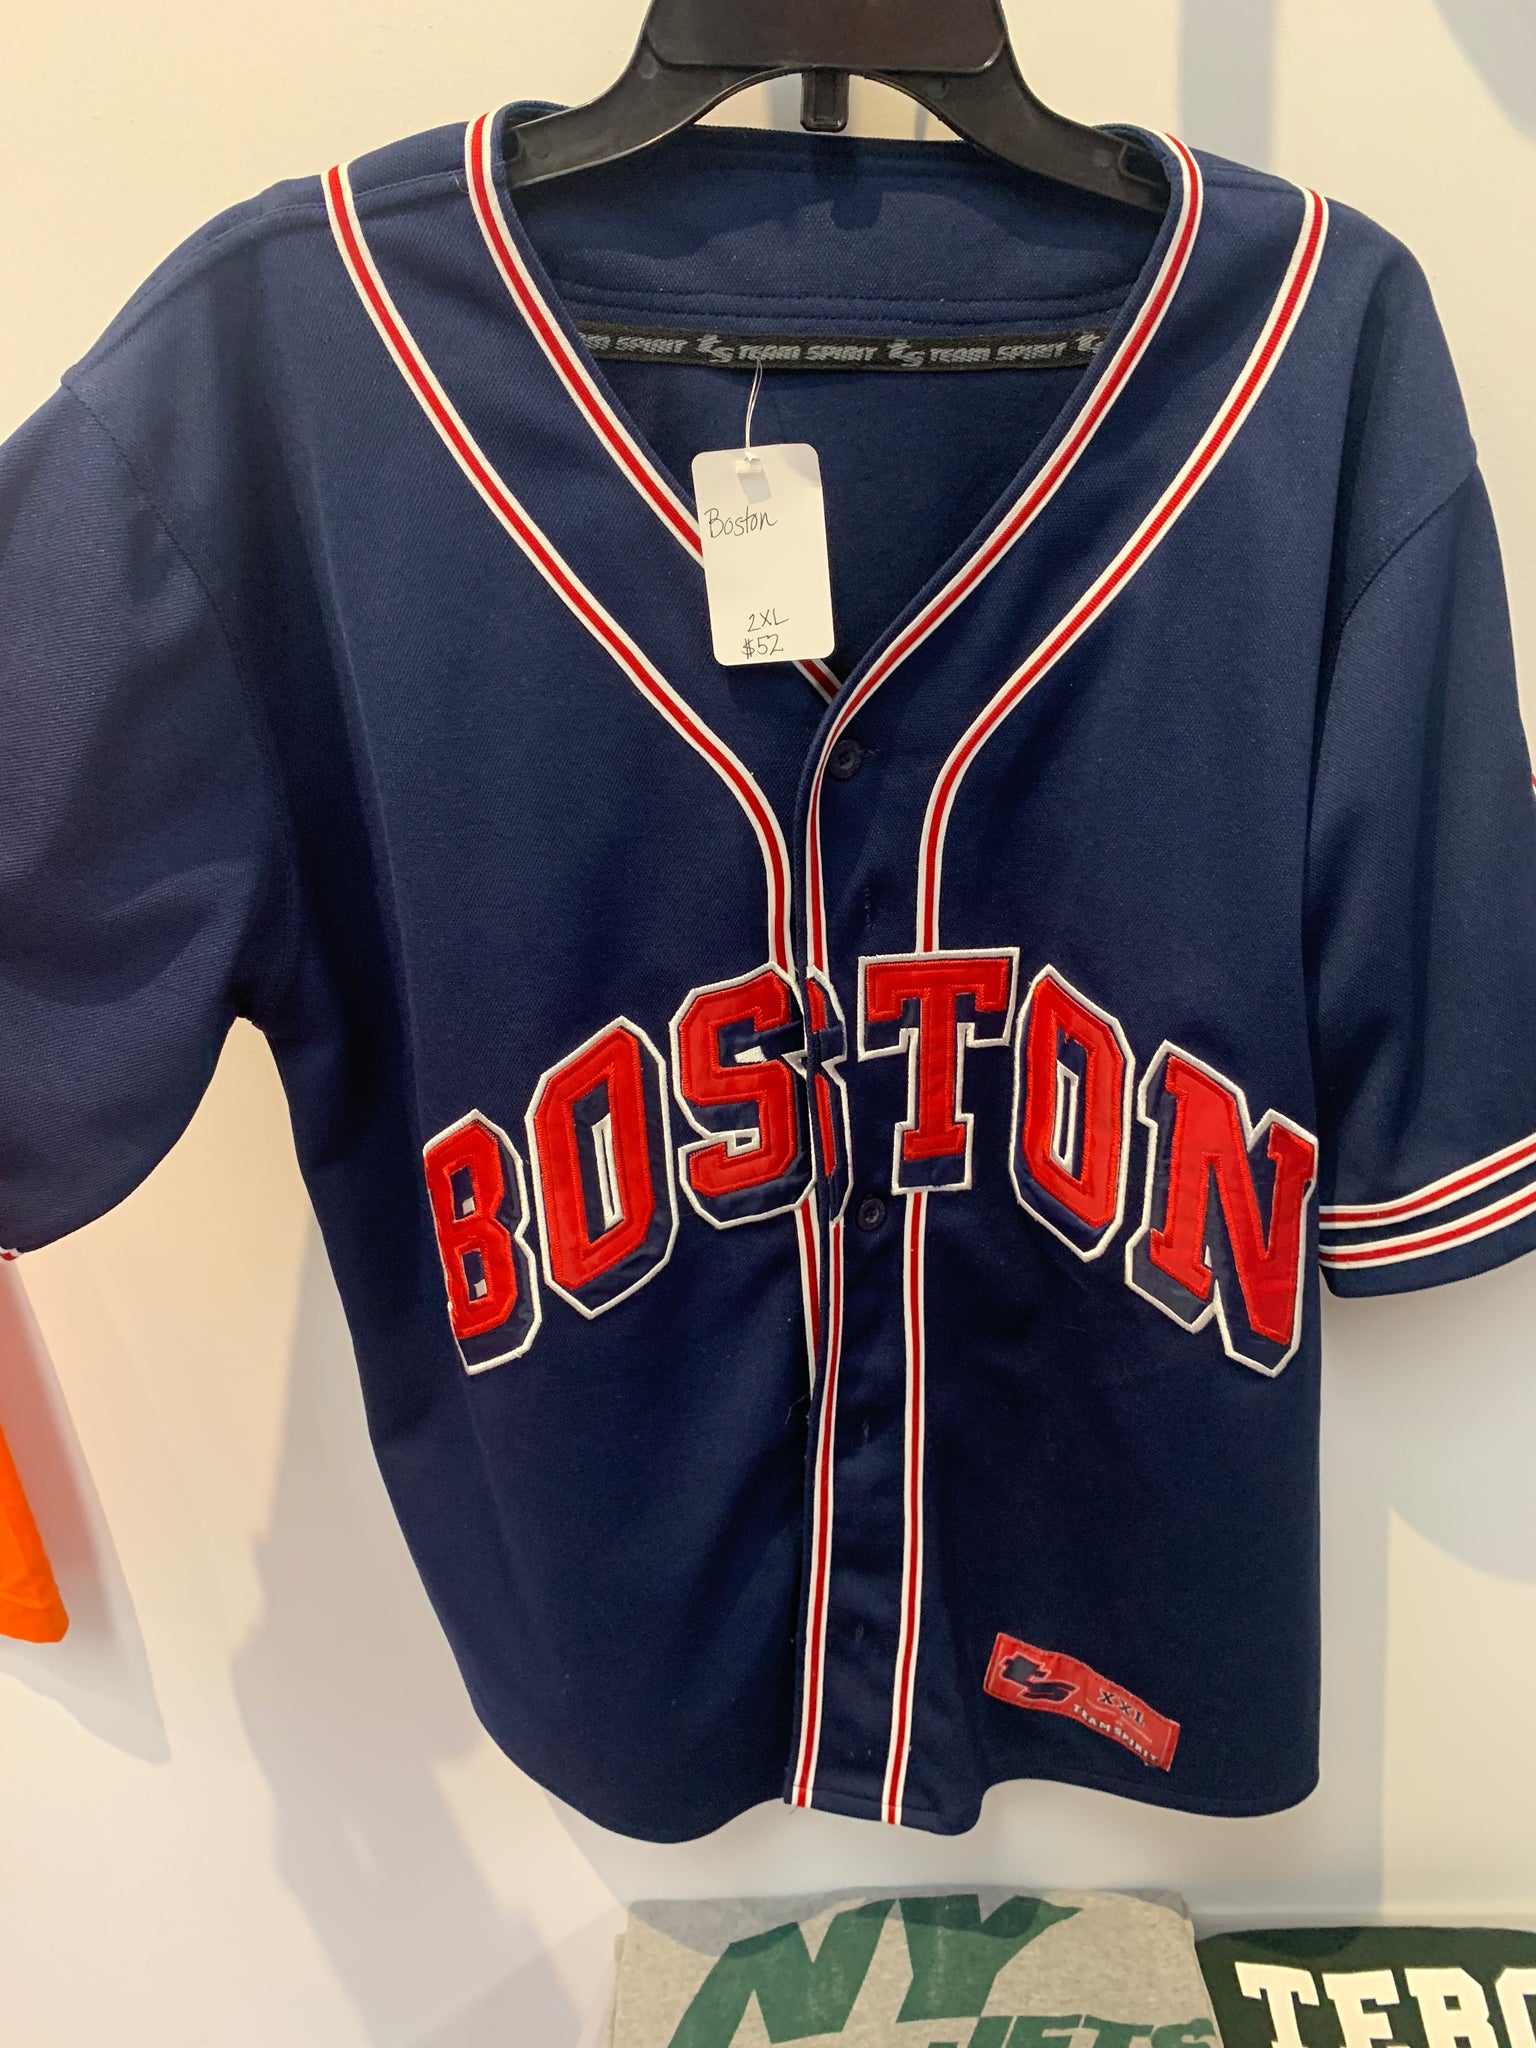 Navy Blue Boston Red Sox Jersey with Red lettering. Size 2XL